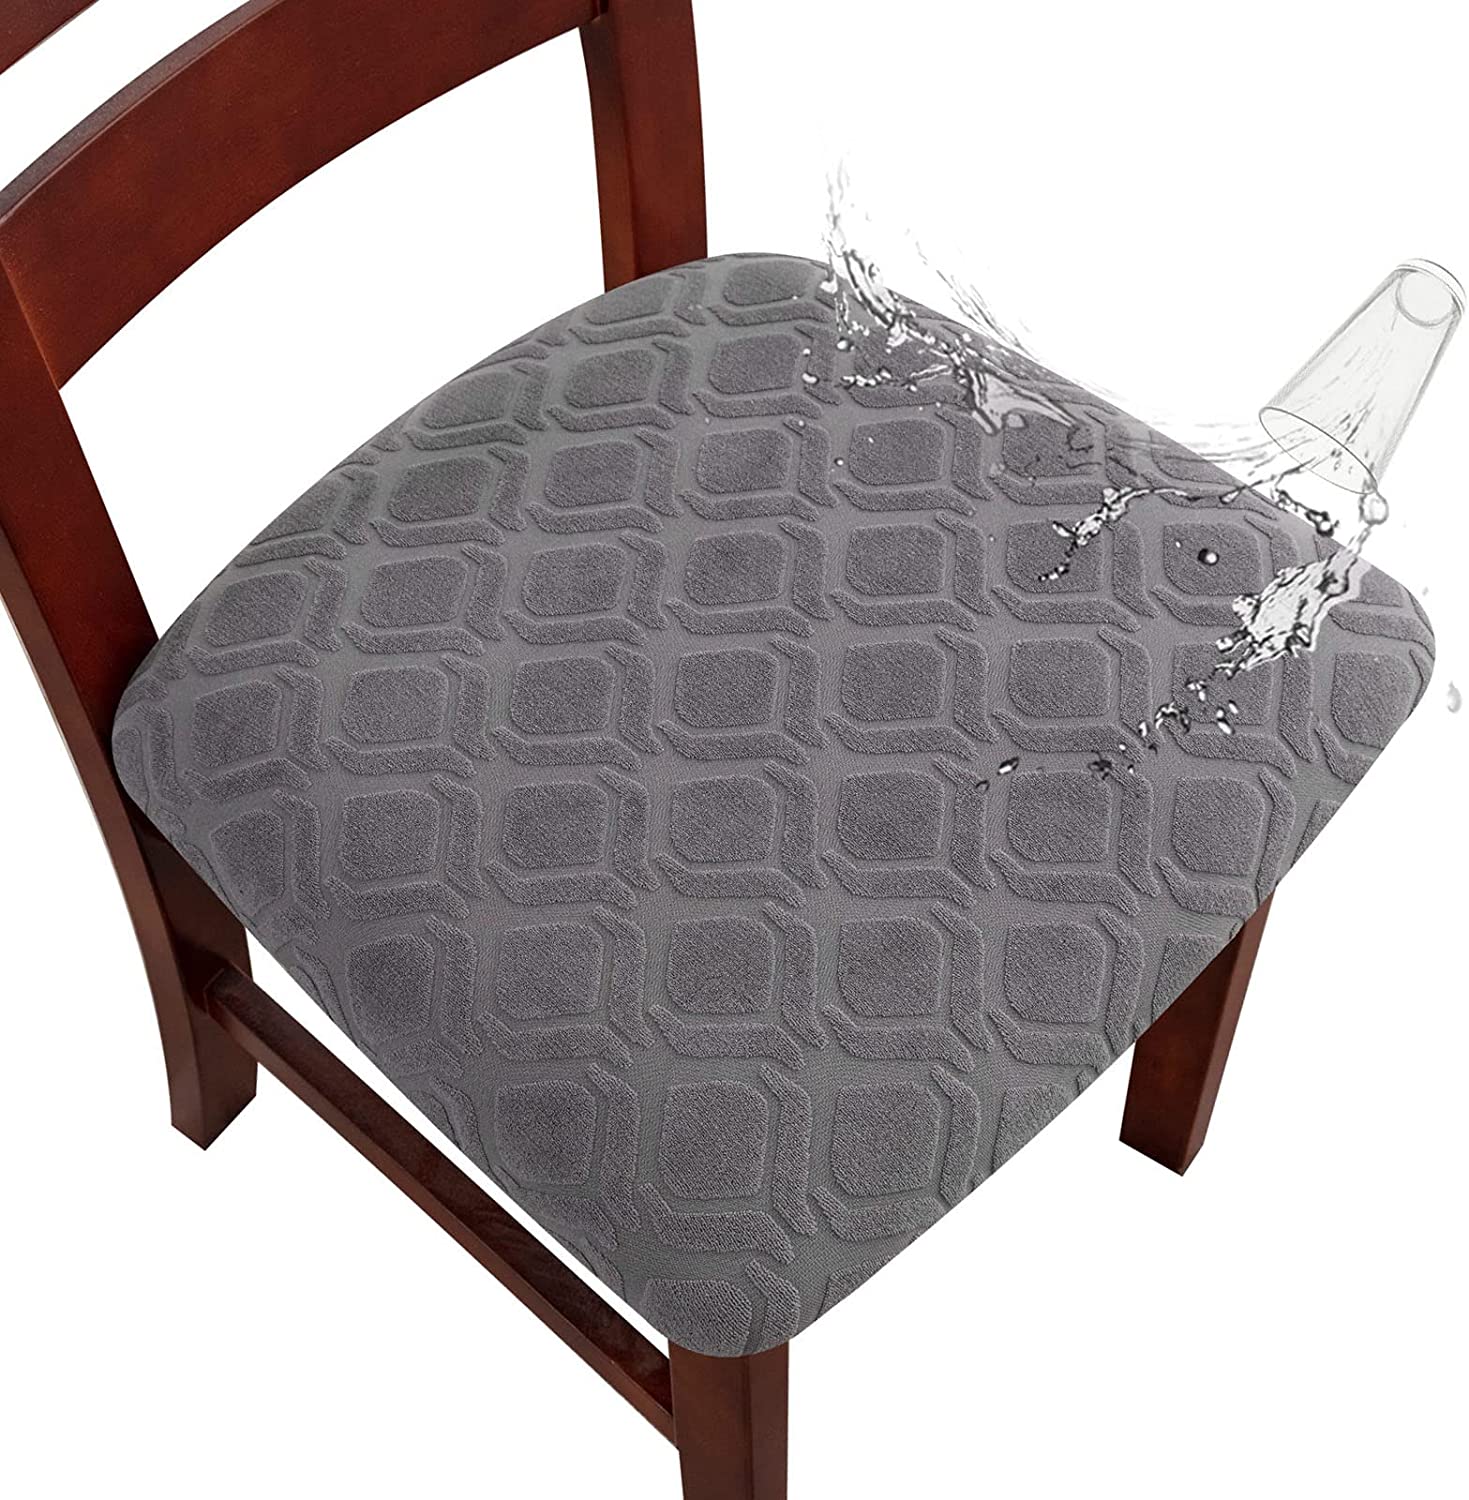 🔥Spring Hot Sale - 50% Off - 100% Waterproof Chair Seat Covers